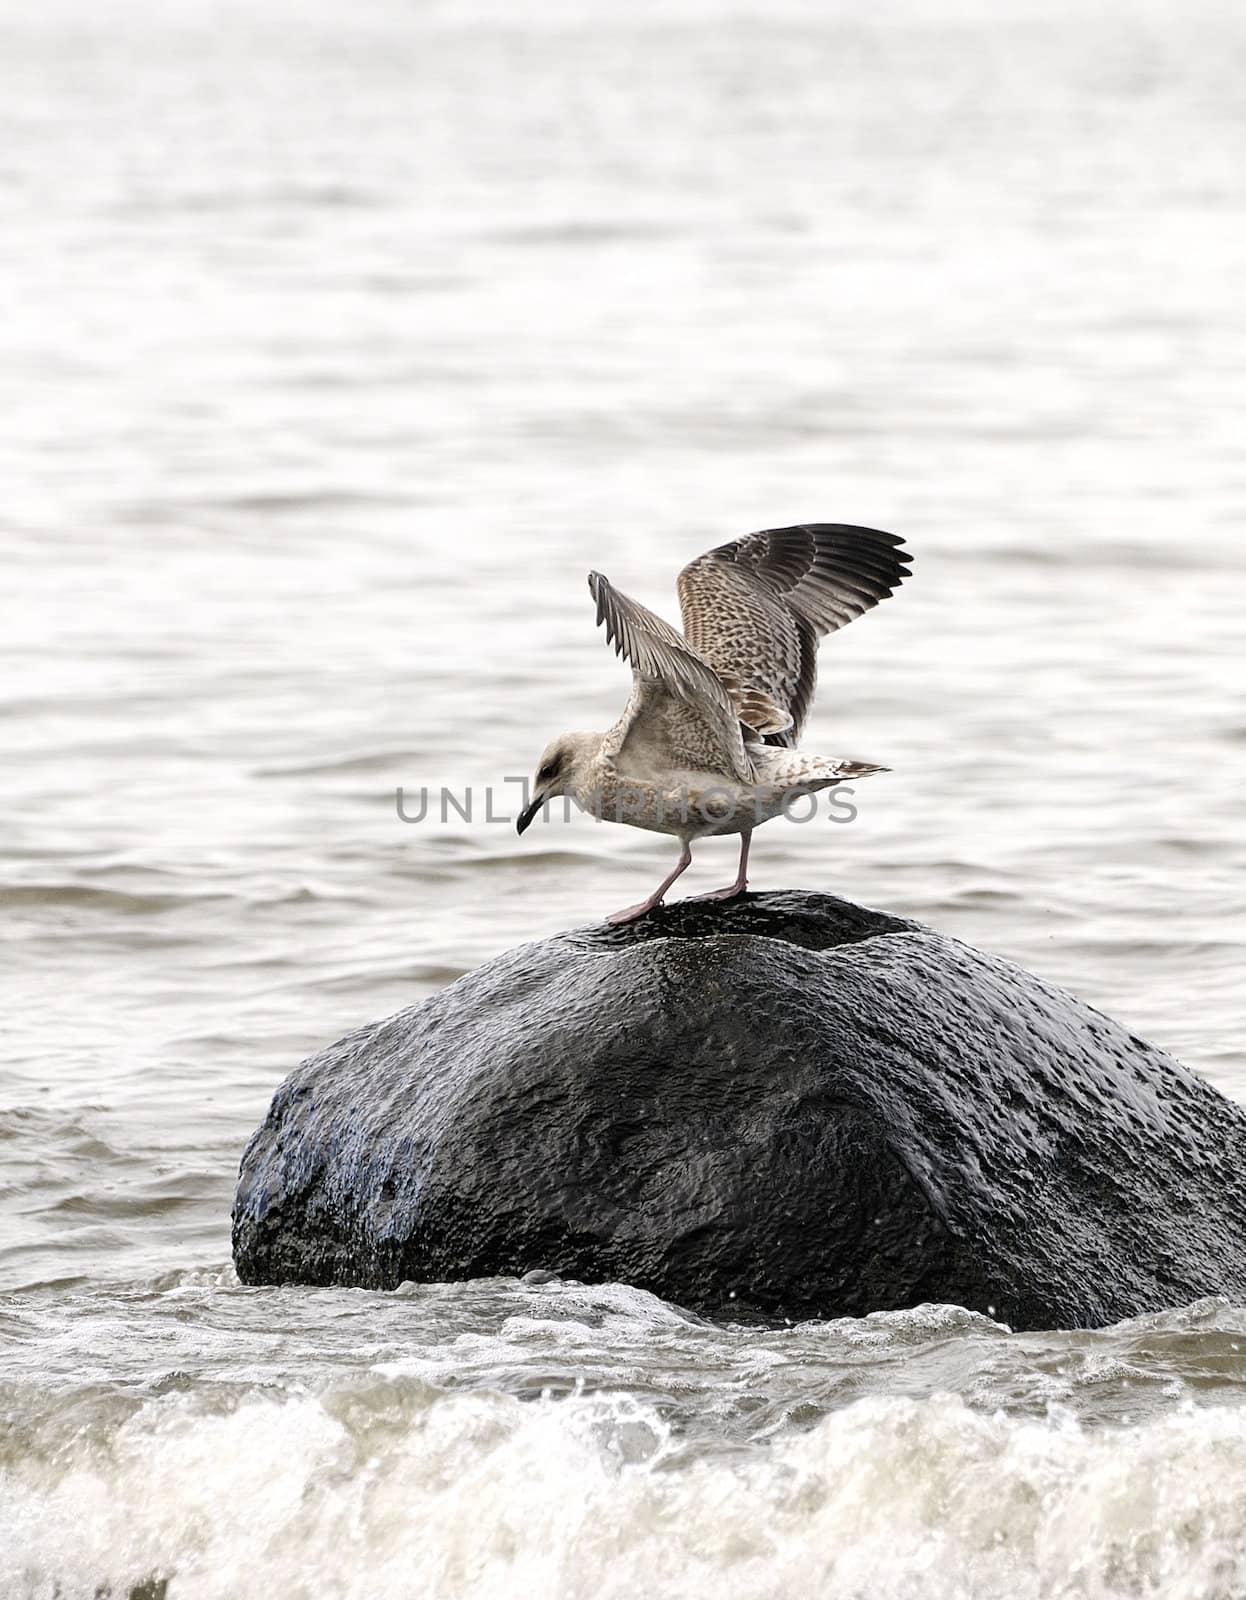 Seagull on a stone in sea by Severas